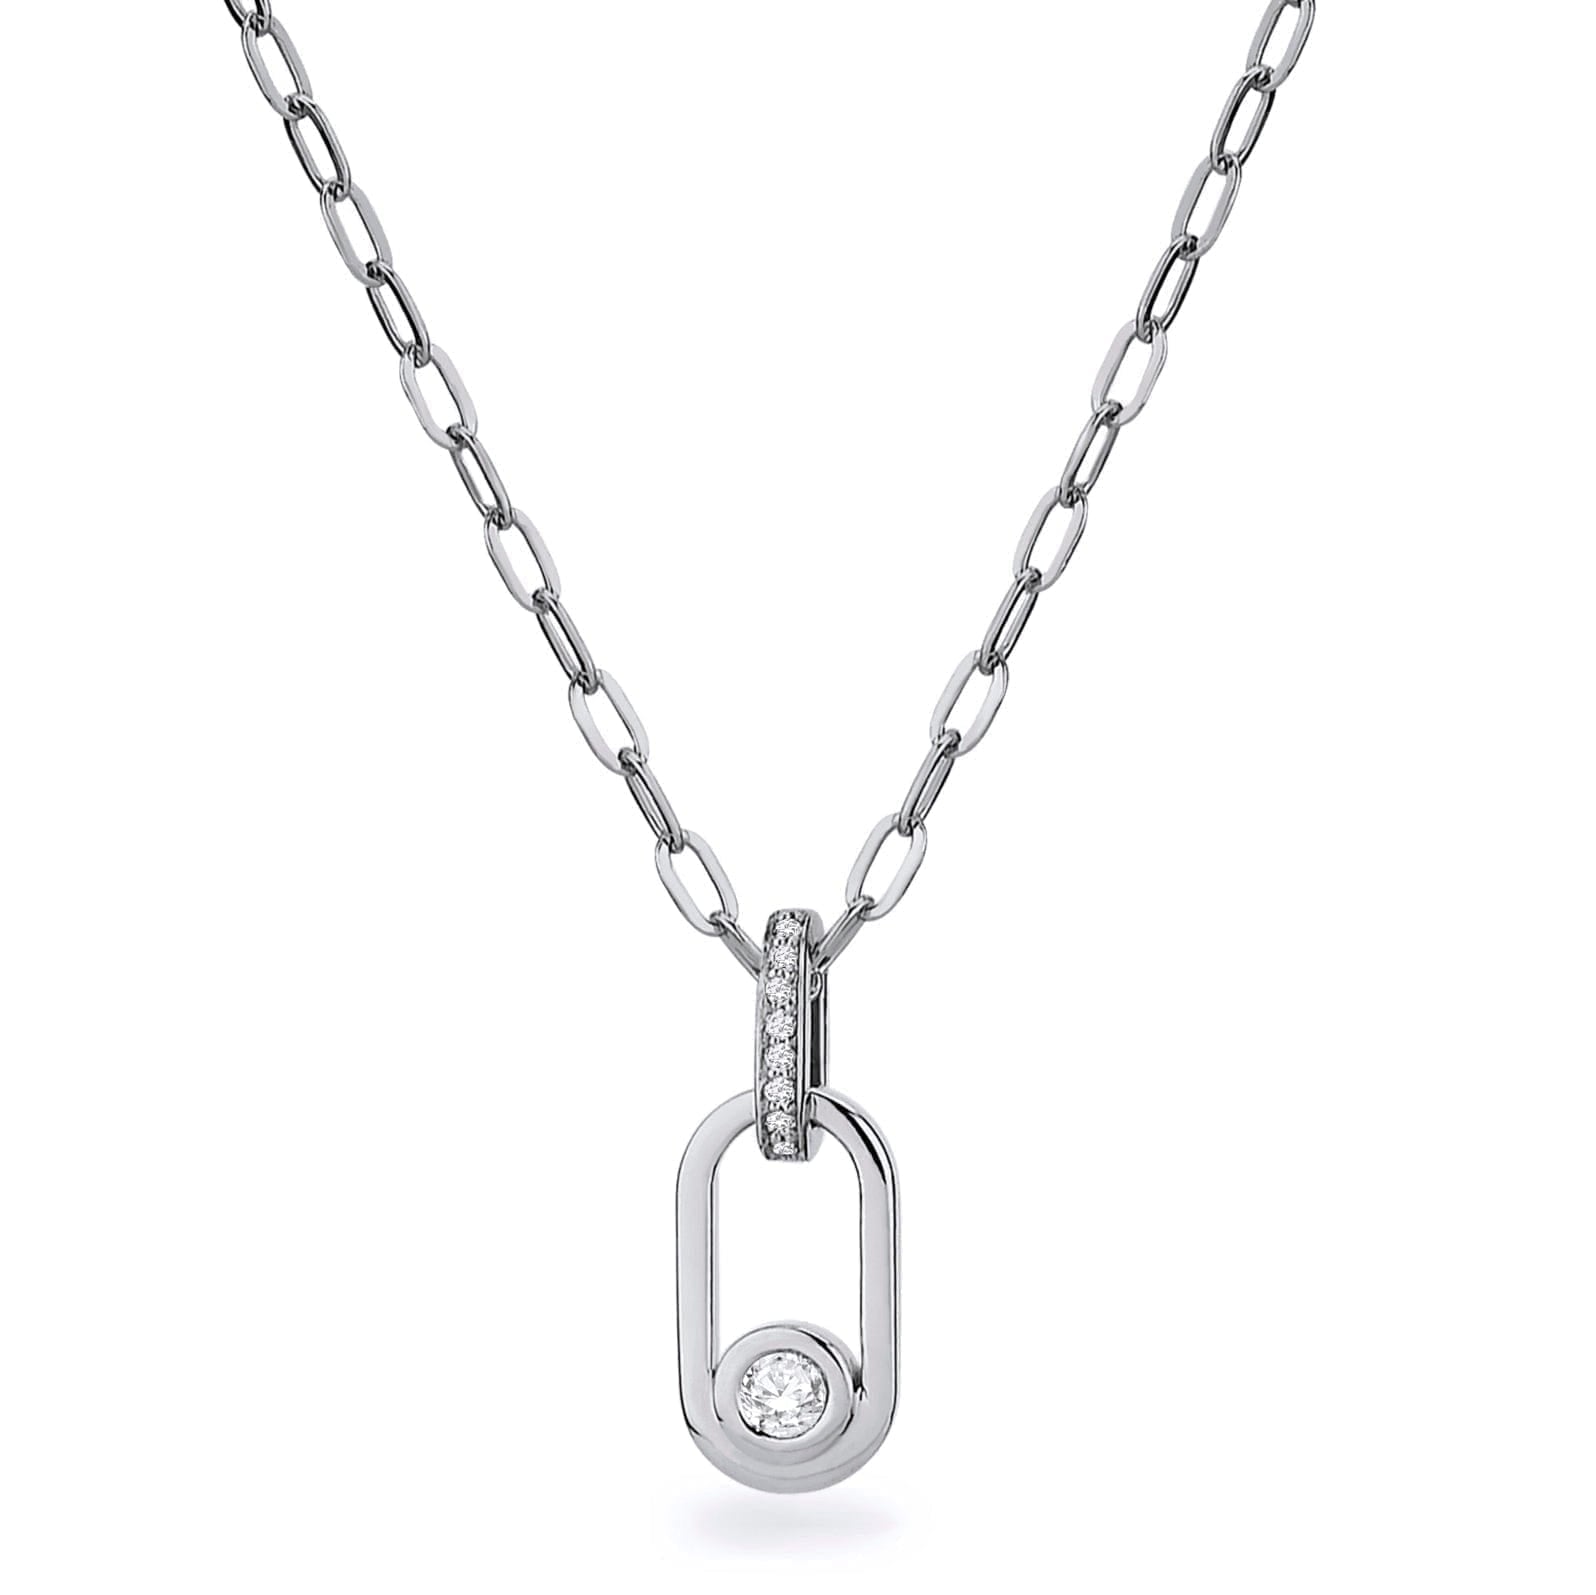 MICHAEL M Necklaces 14K White Gold Small Link Necklace P354-WG